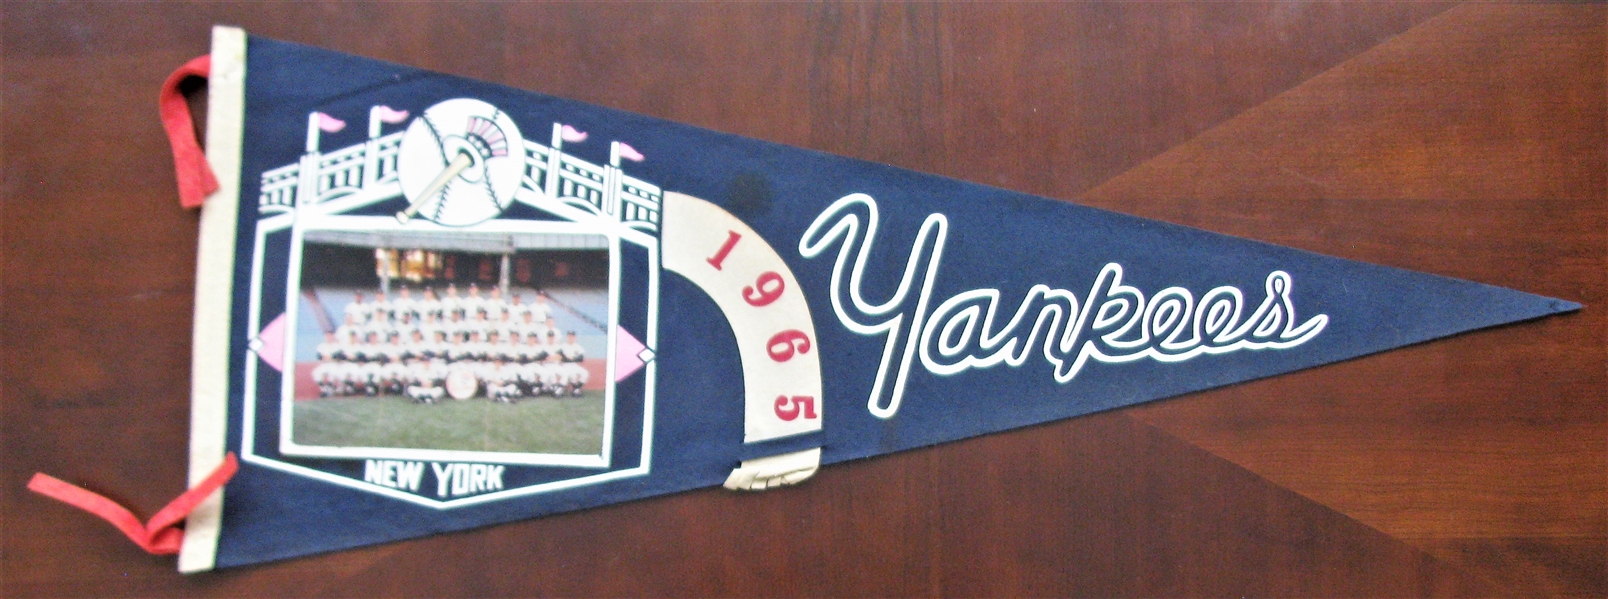 1965 NY YANKEES TEAM PICTURE PENNANT